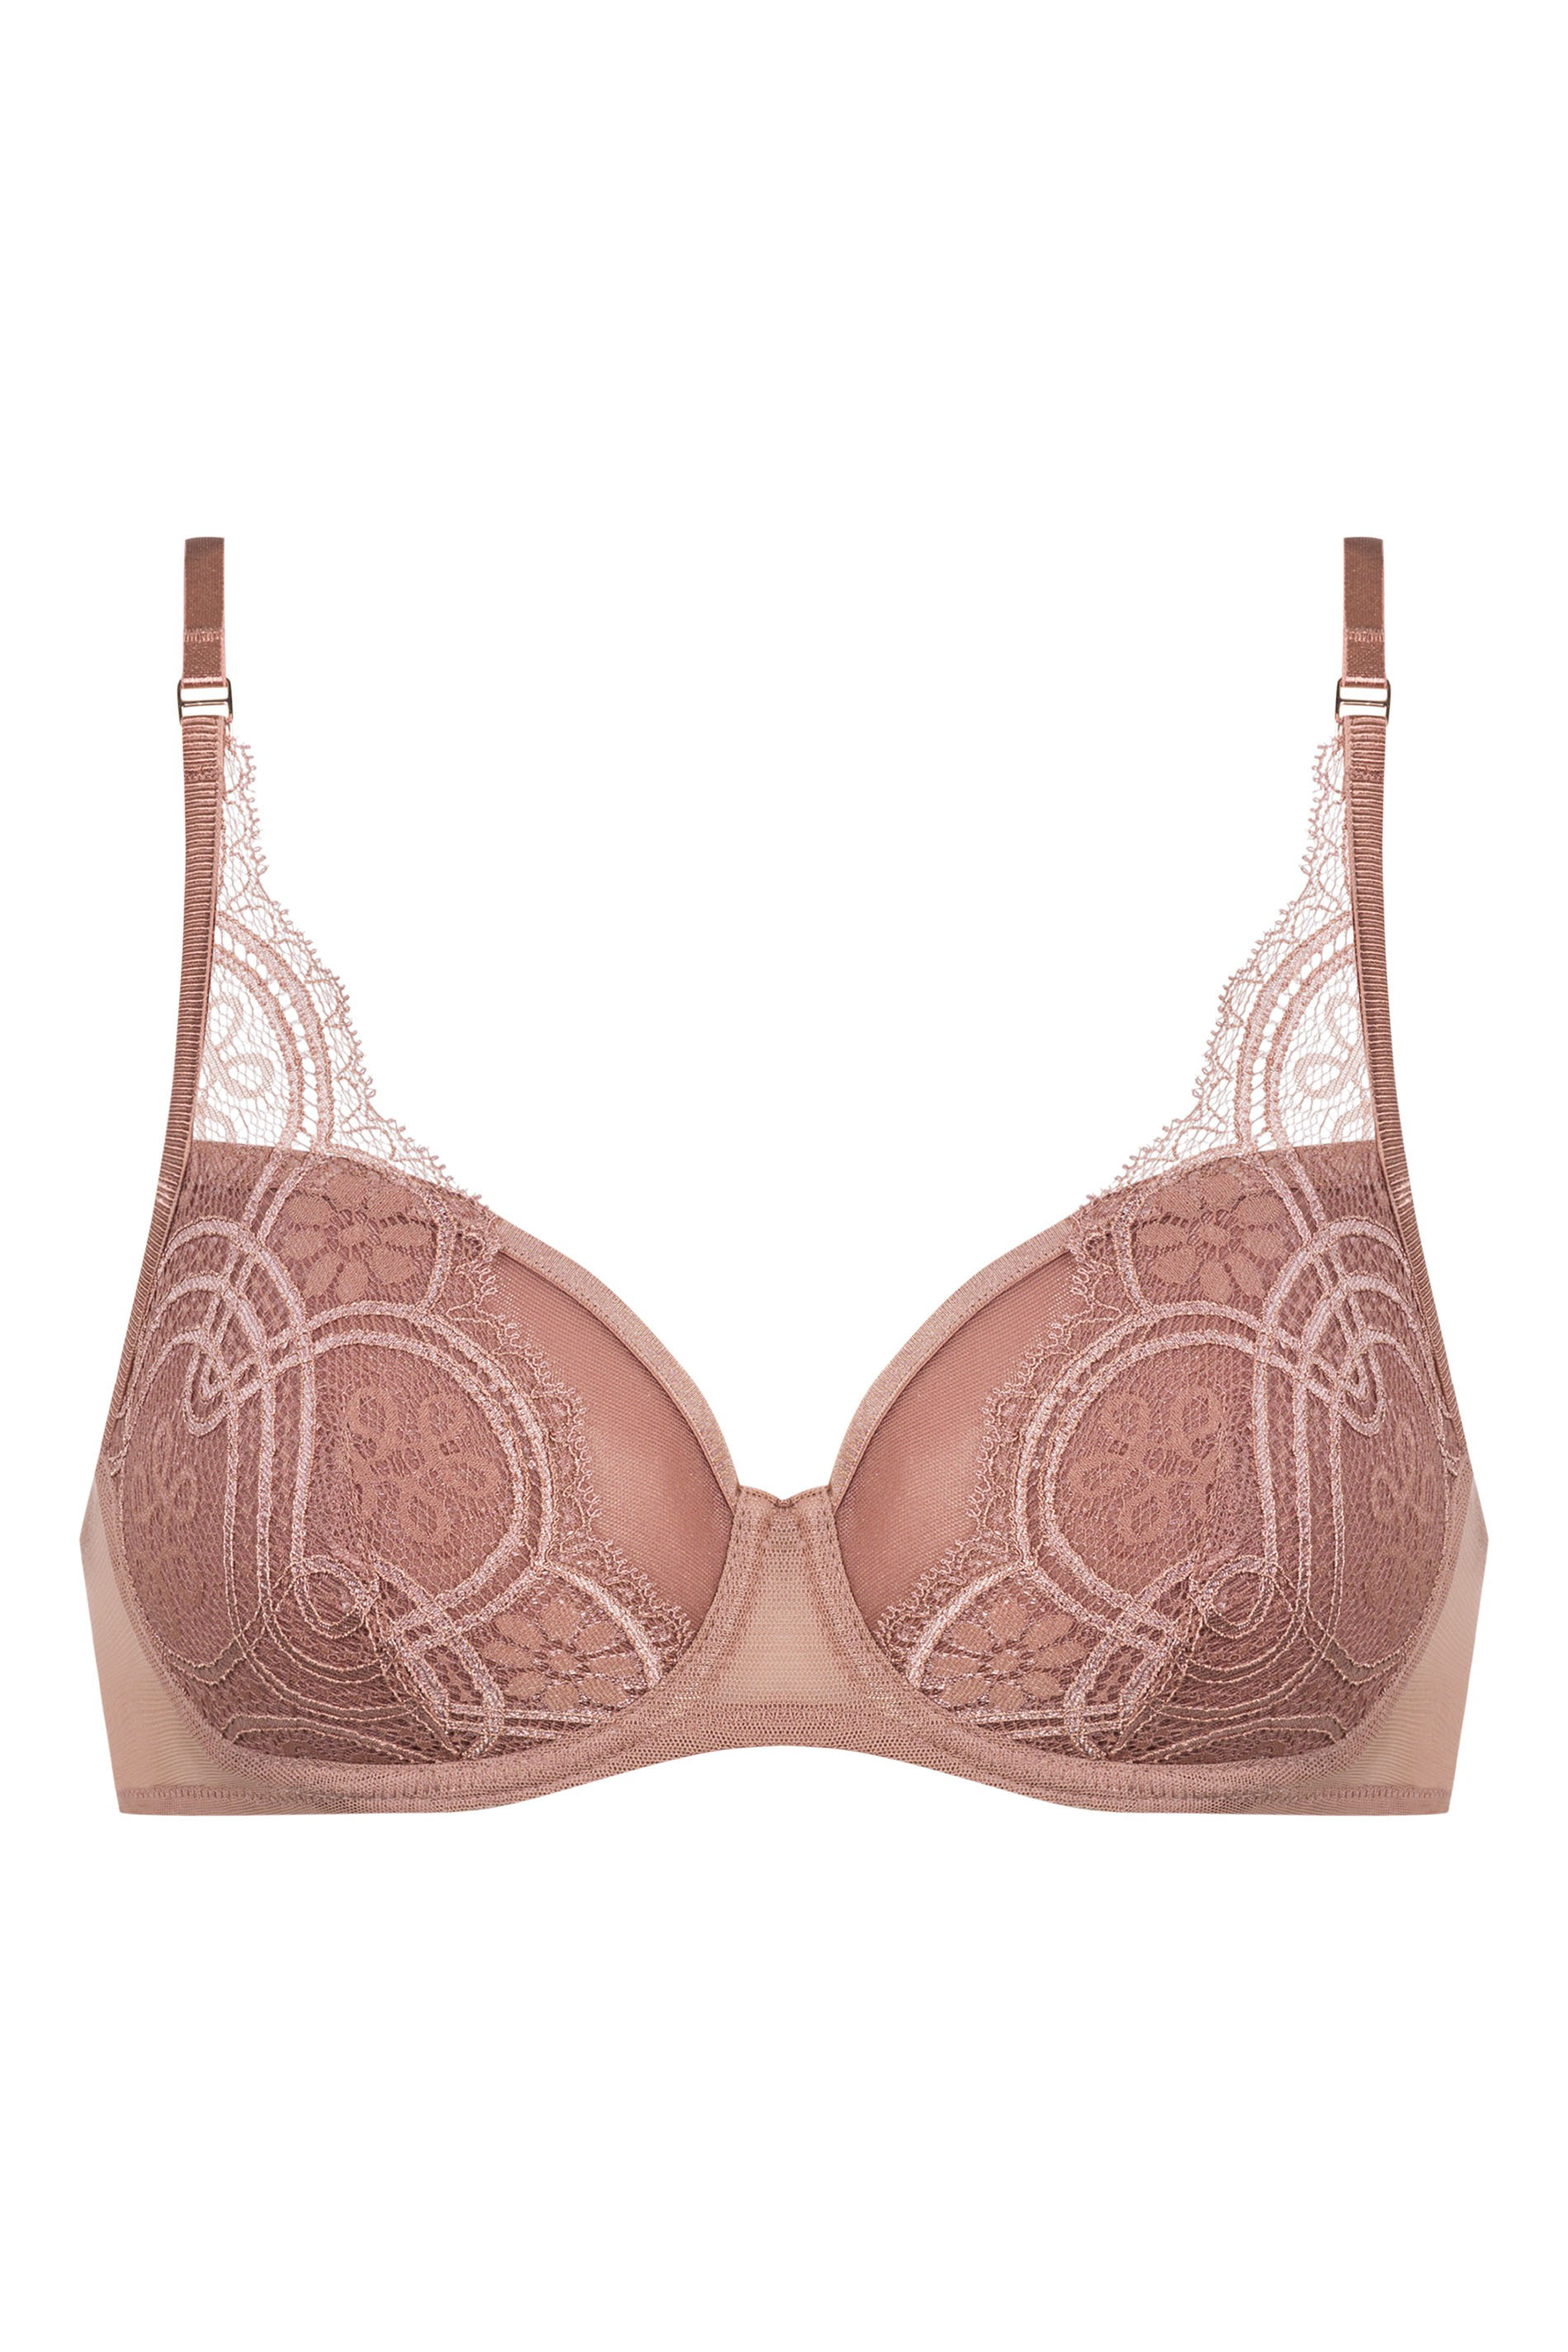 Spacer bra | Half Cup Serie Stunning Cut Out | mey®